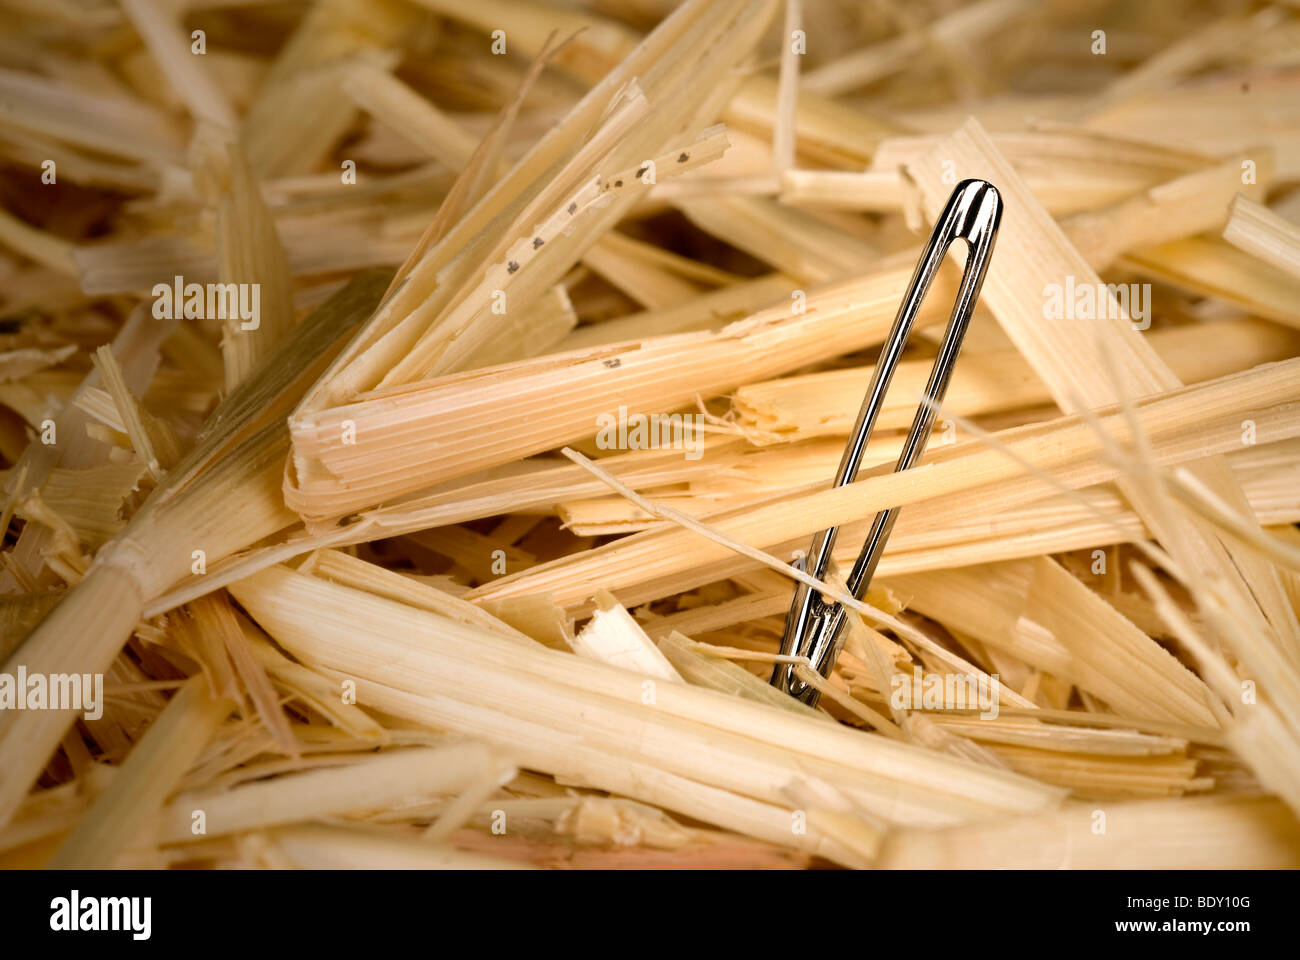 A shiny, metallic needle found in a haystack. Stock Photo